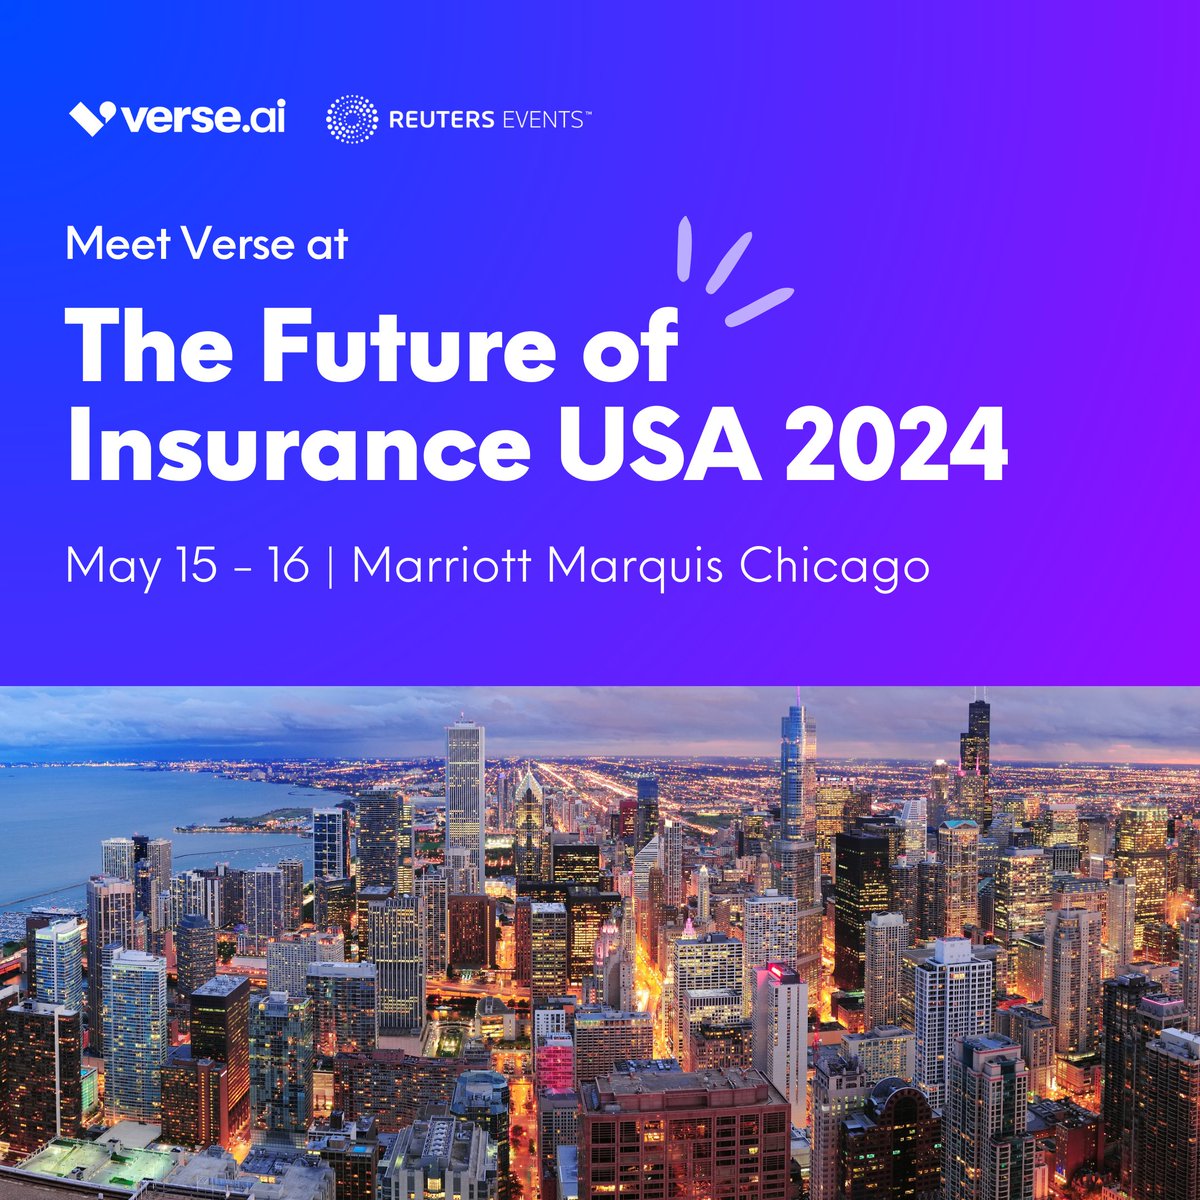 We're thrilled to announce that the Verse team is heading to The Future of Insurance in Chicago this spring — we look forward to meeting many of you there! 

#FOIUSA